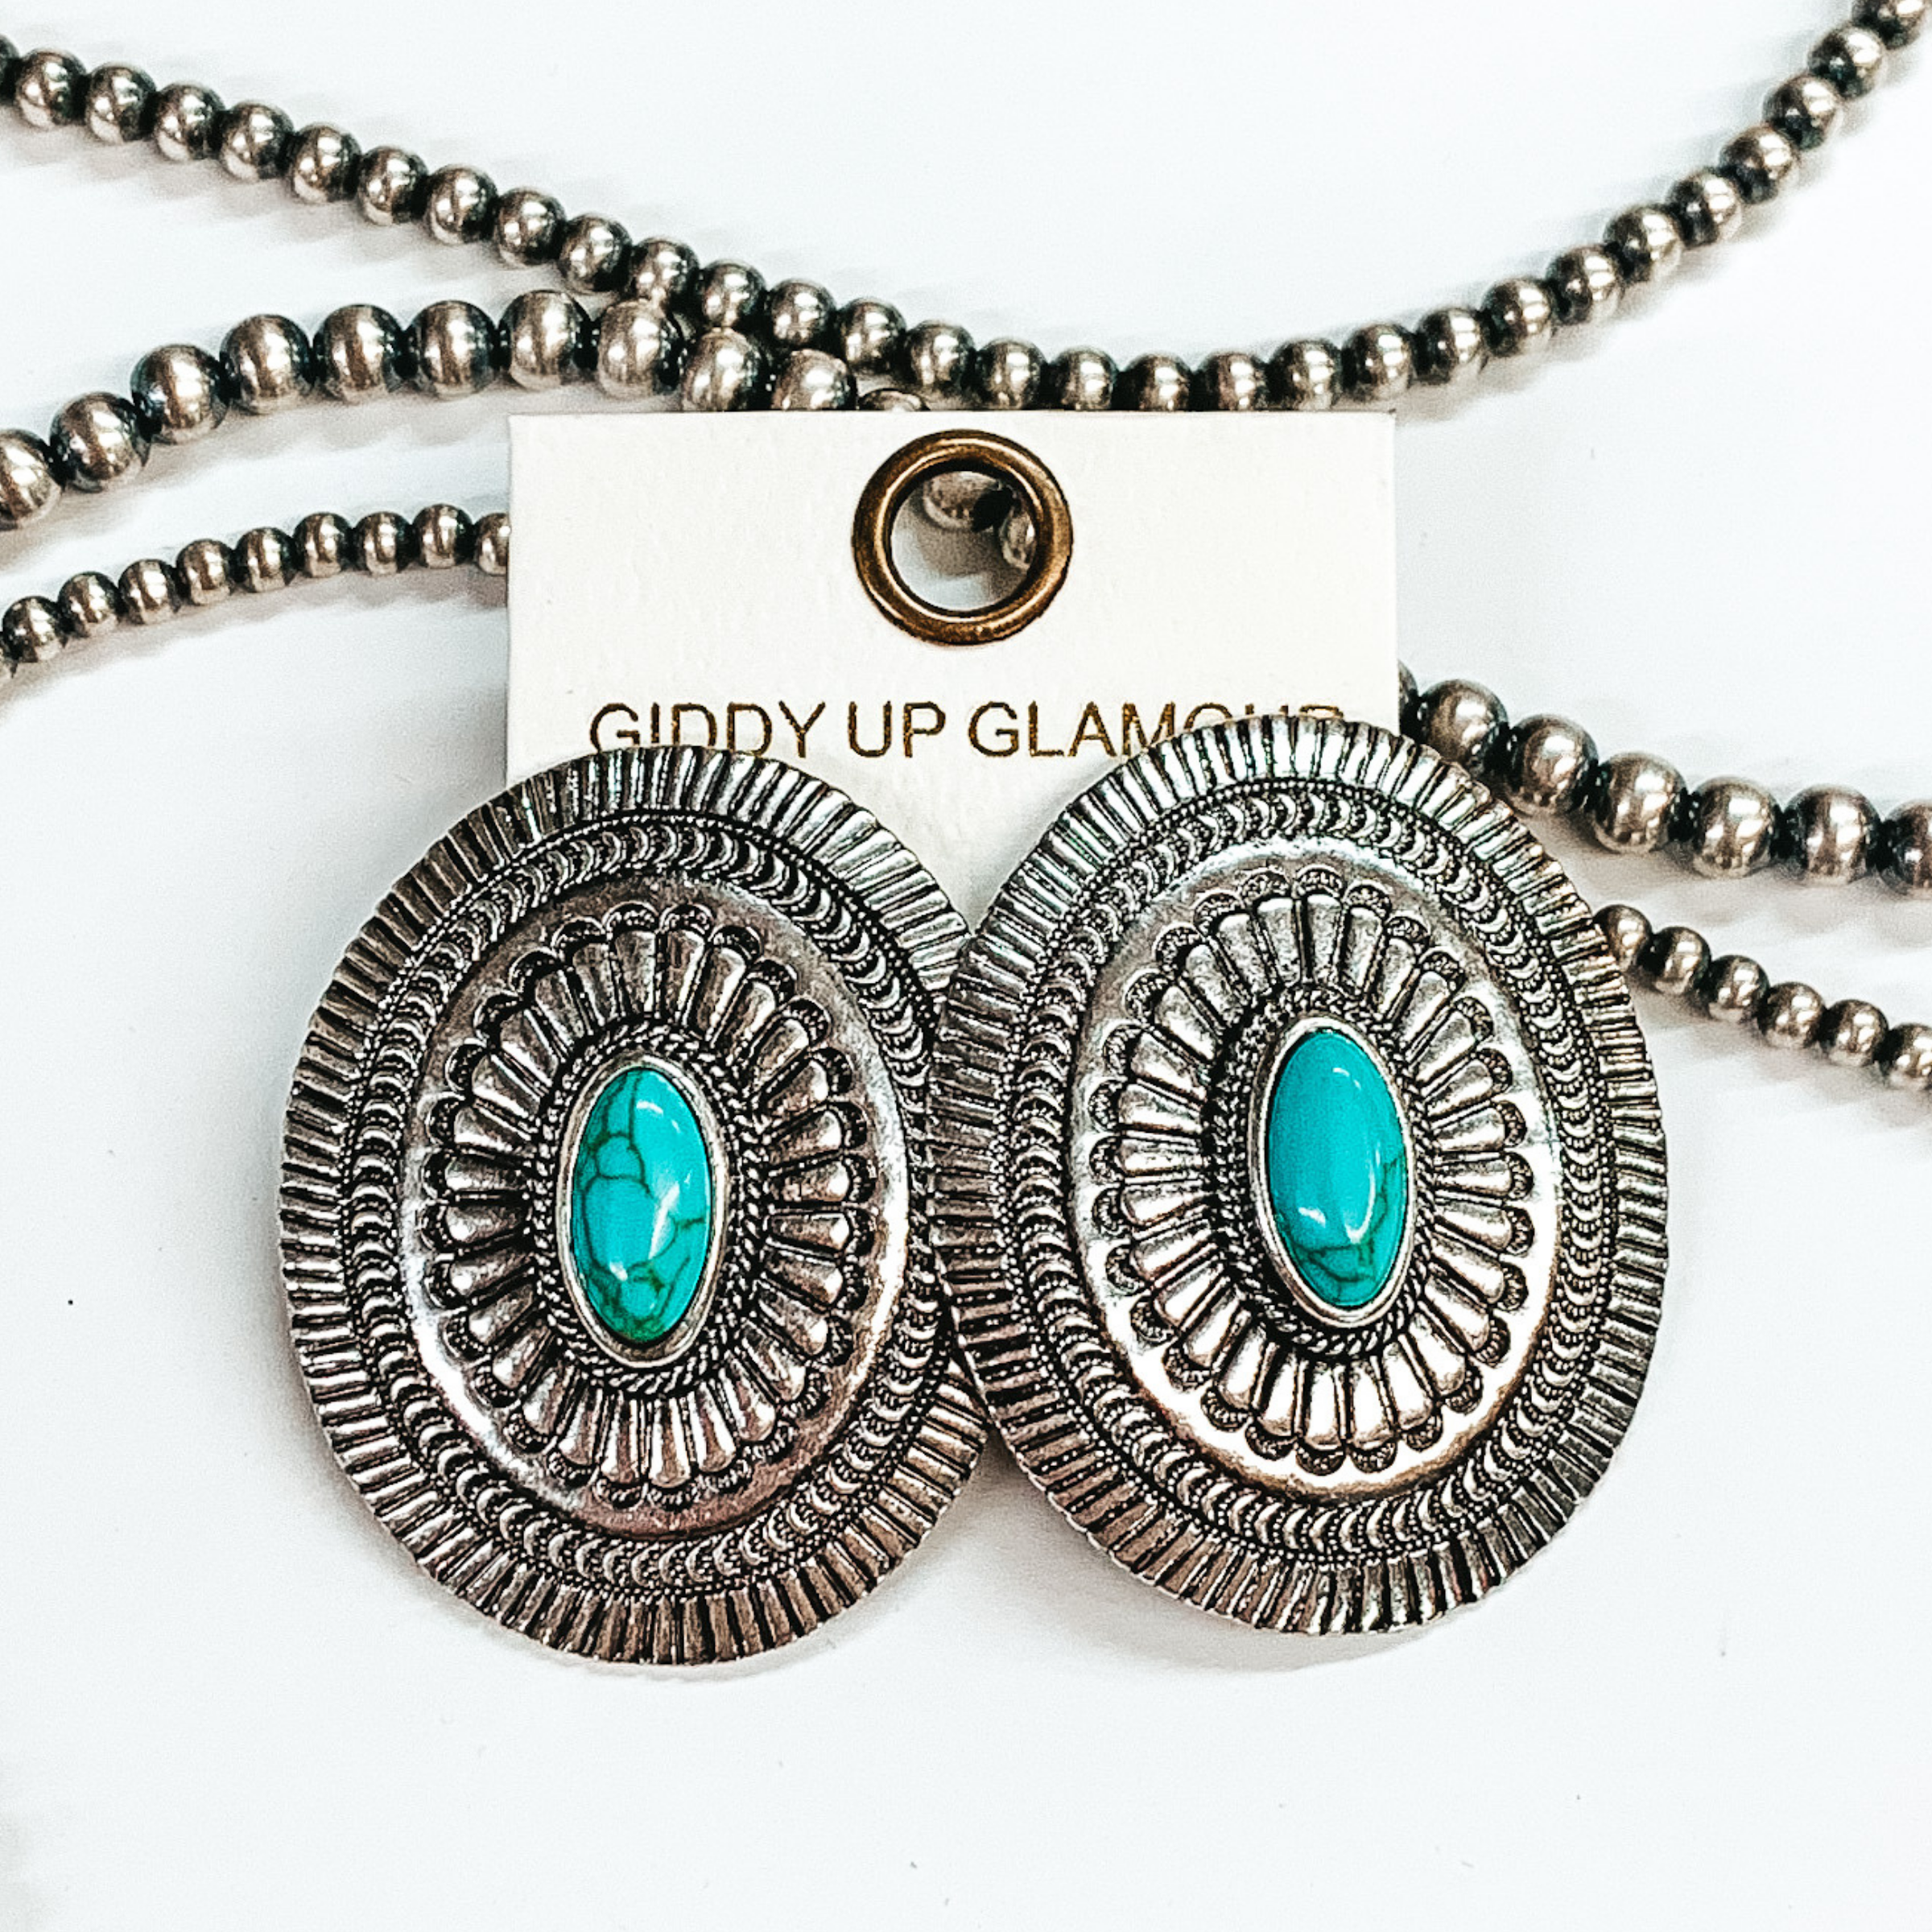 Large silver concho earrings with small oval turquoise stones in the center. Pictured in a white background with beads as decor.